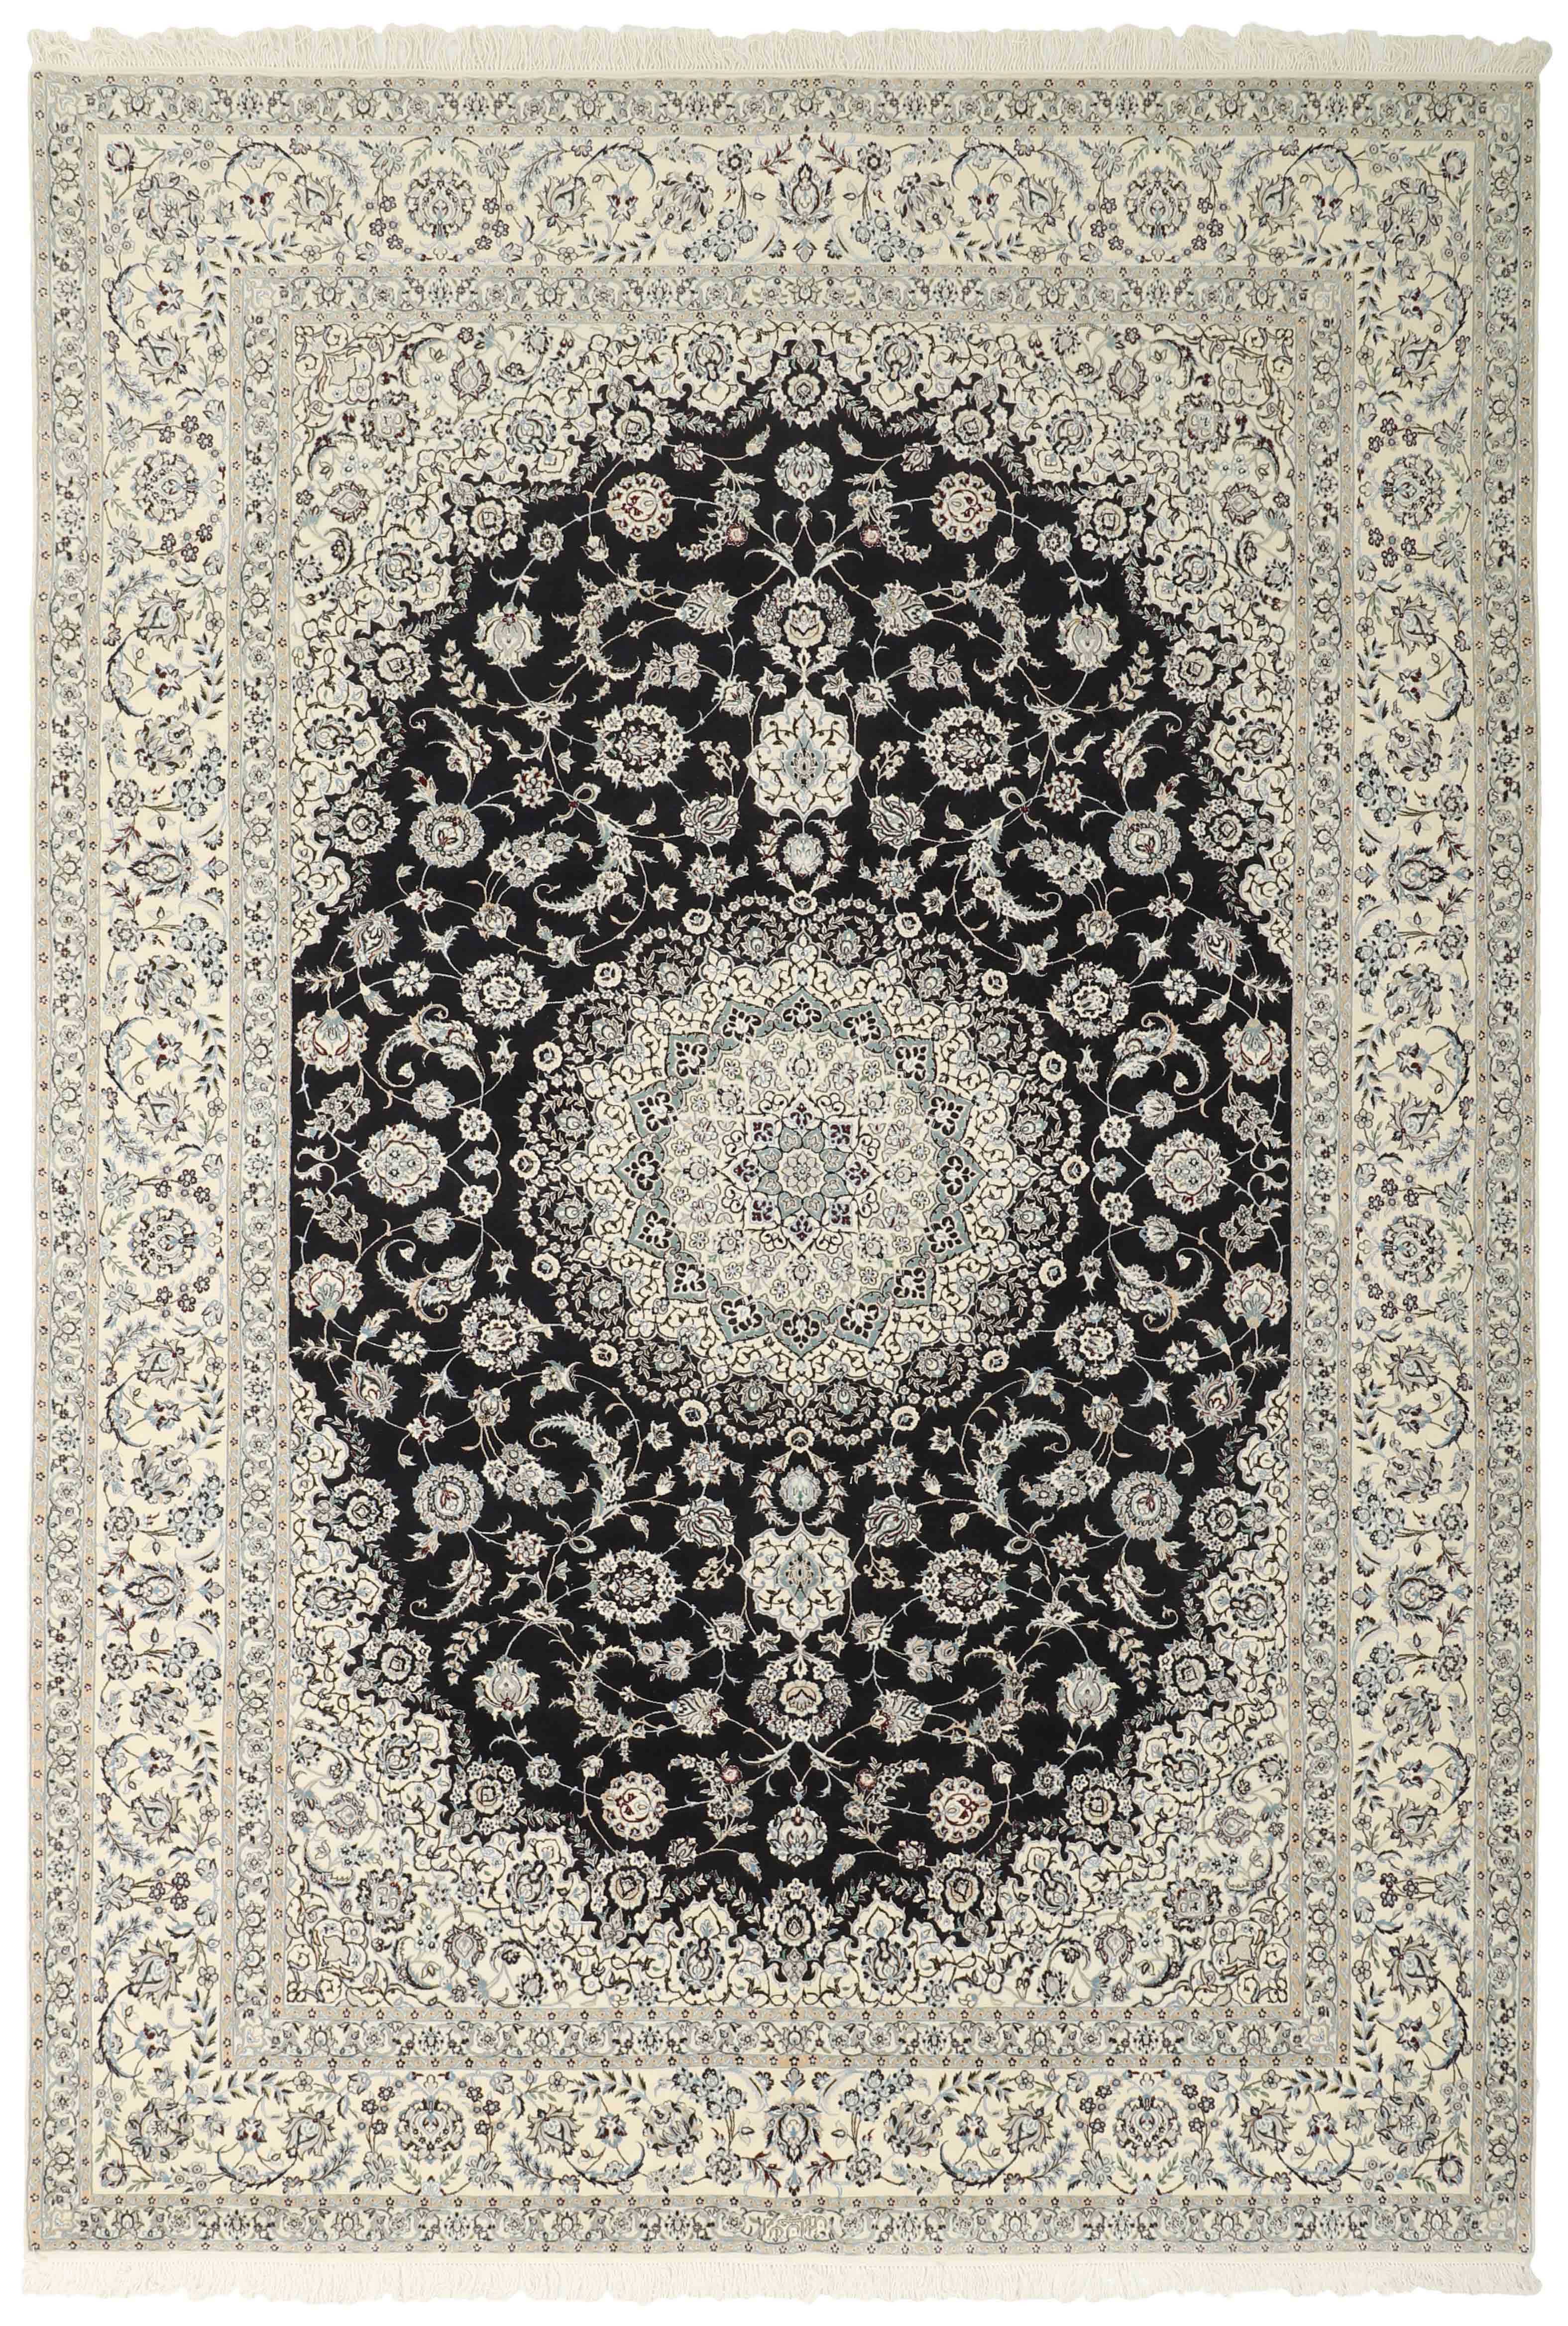 Authentic oriental rug with traditional floral design in cream and blue